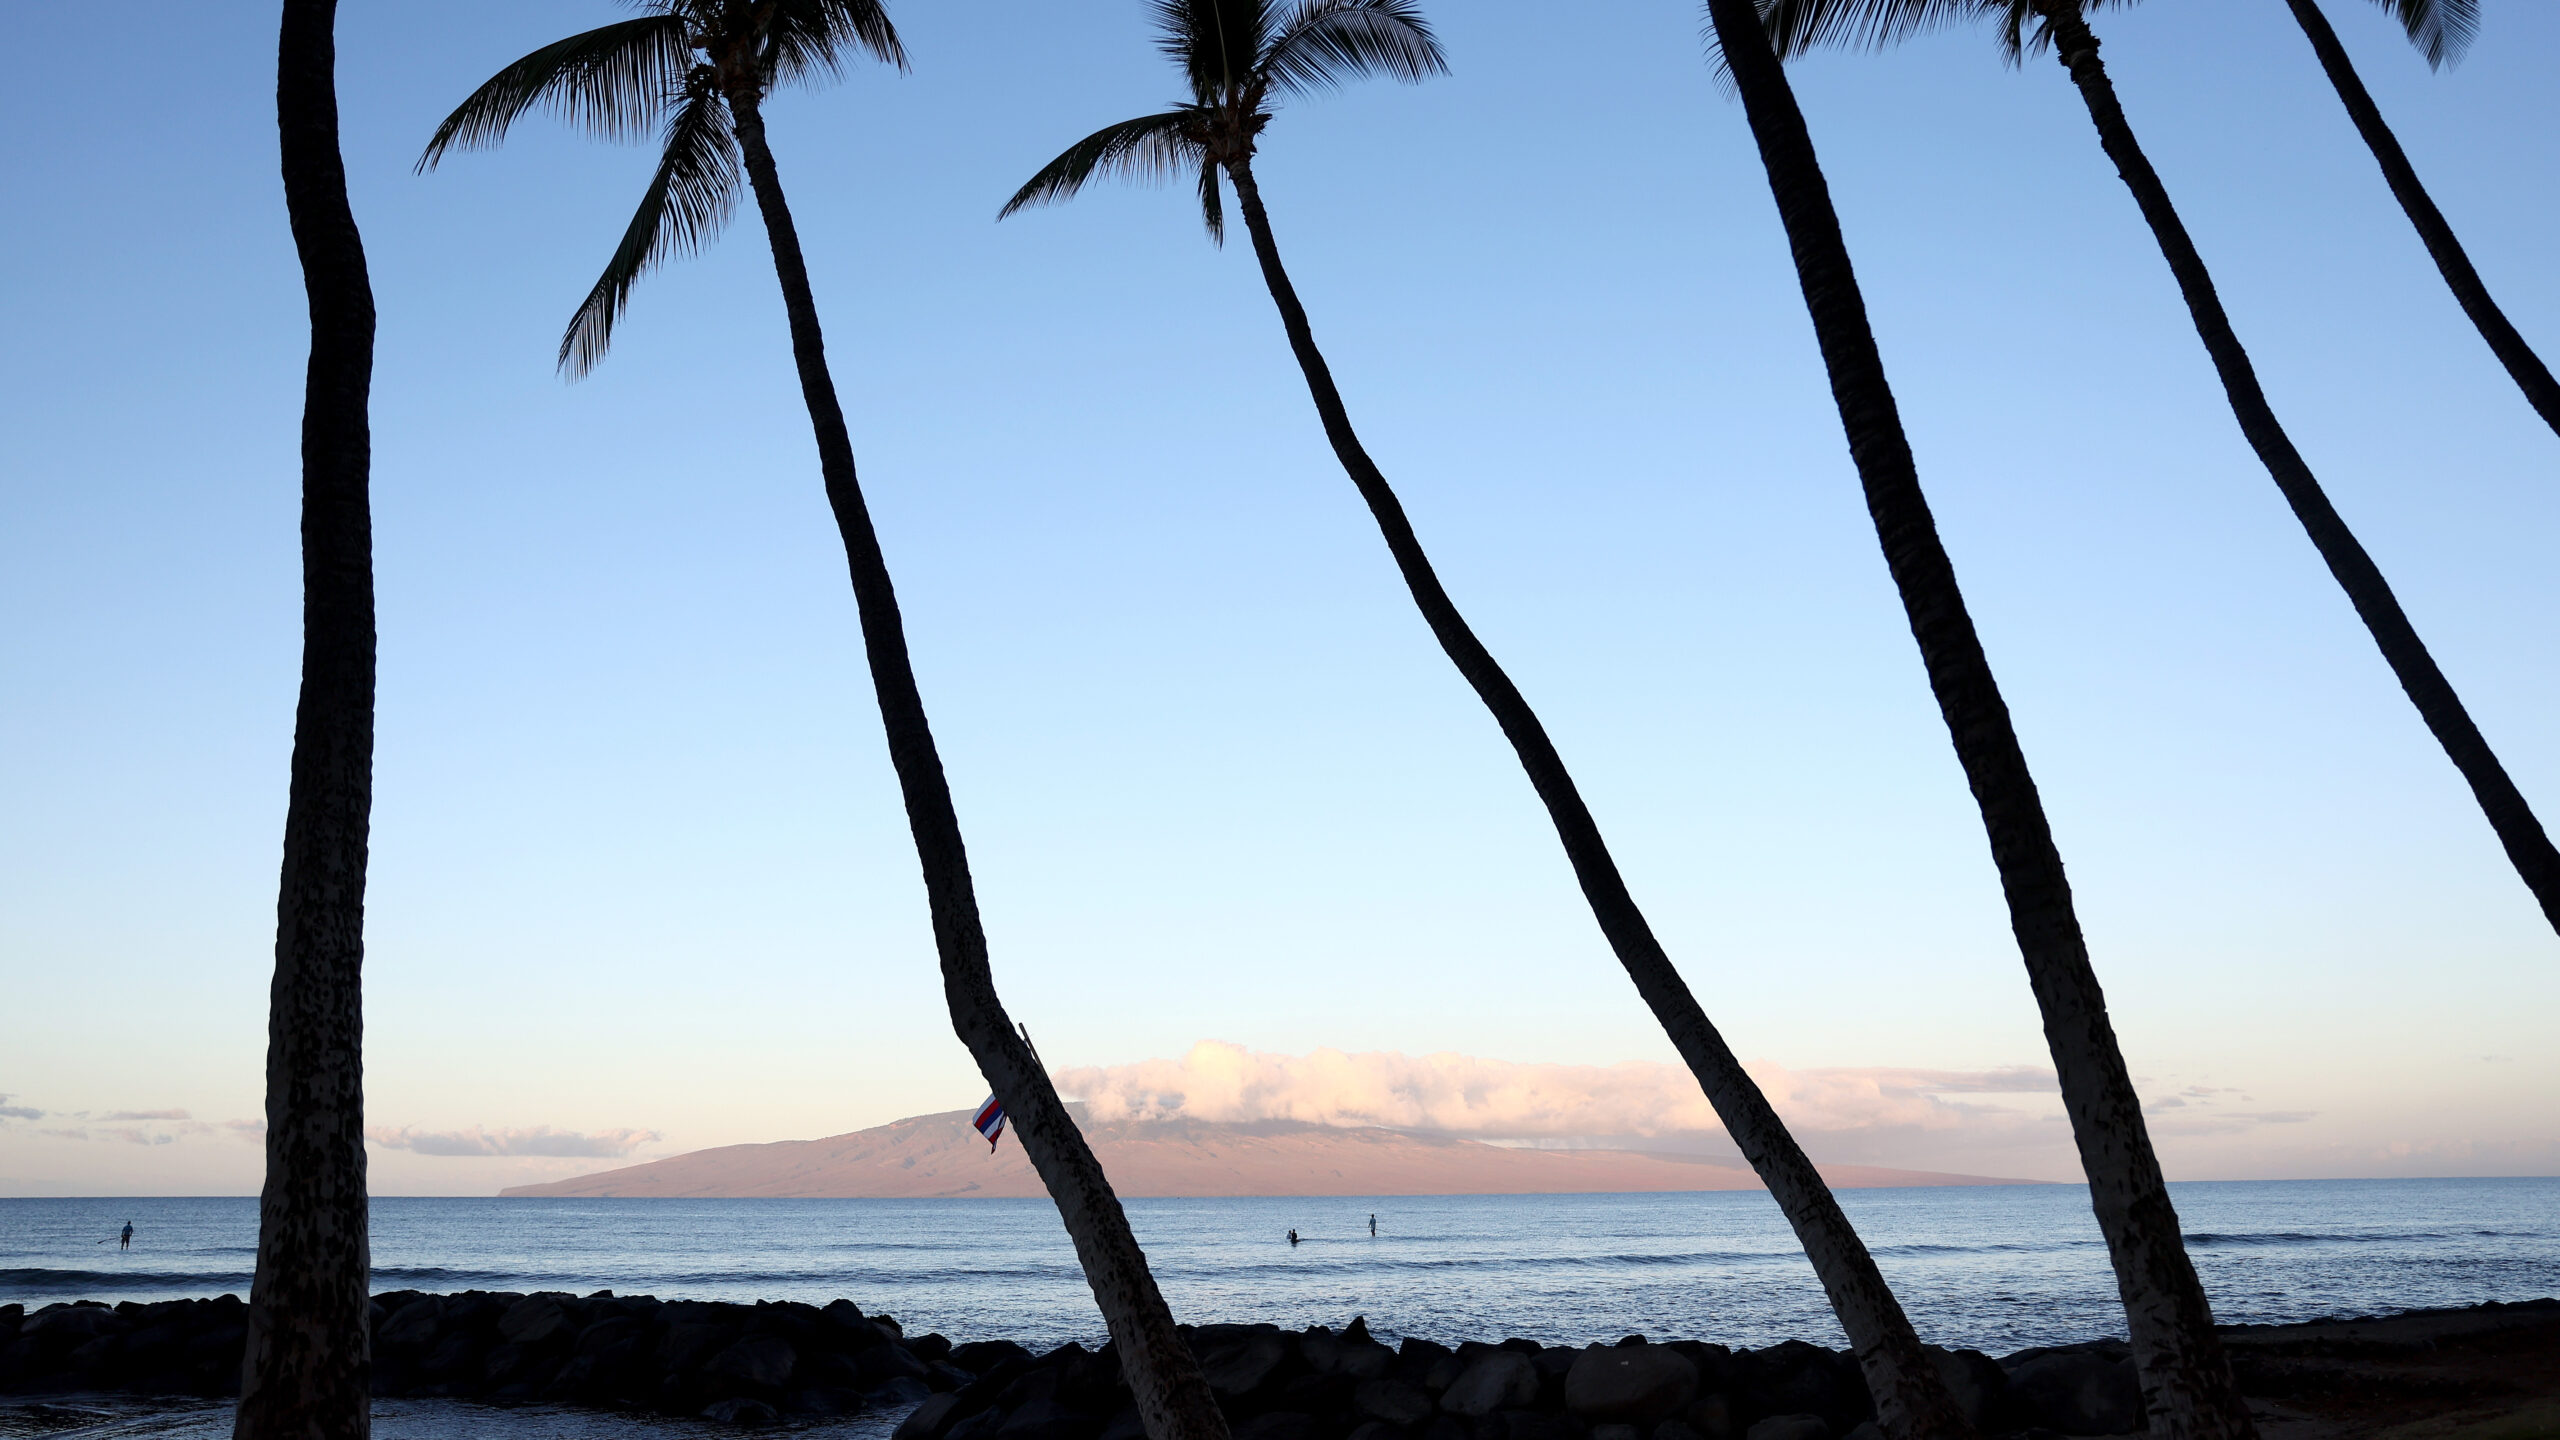 A 39-year-old surfer has died in Hawaii after being injured in a ‘shark encounter’